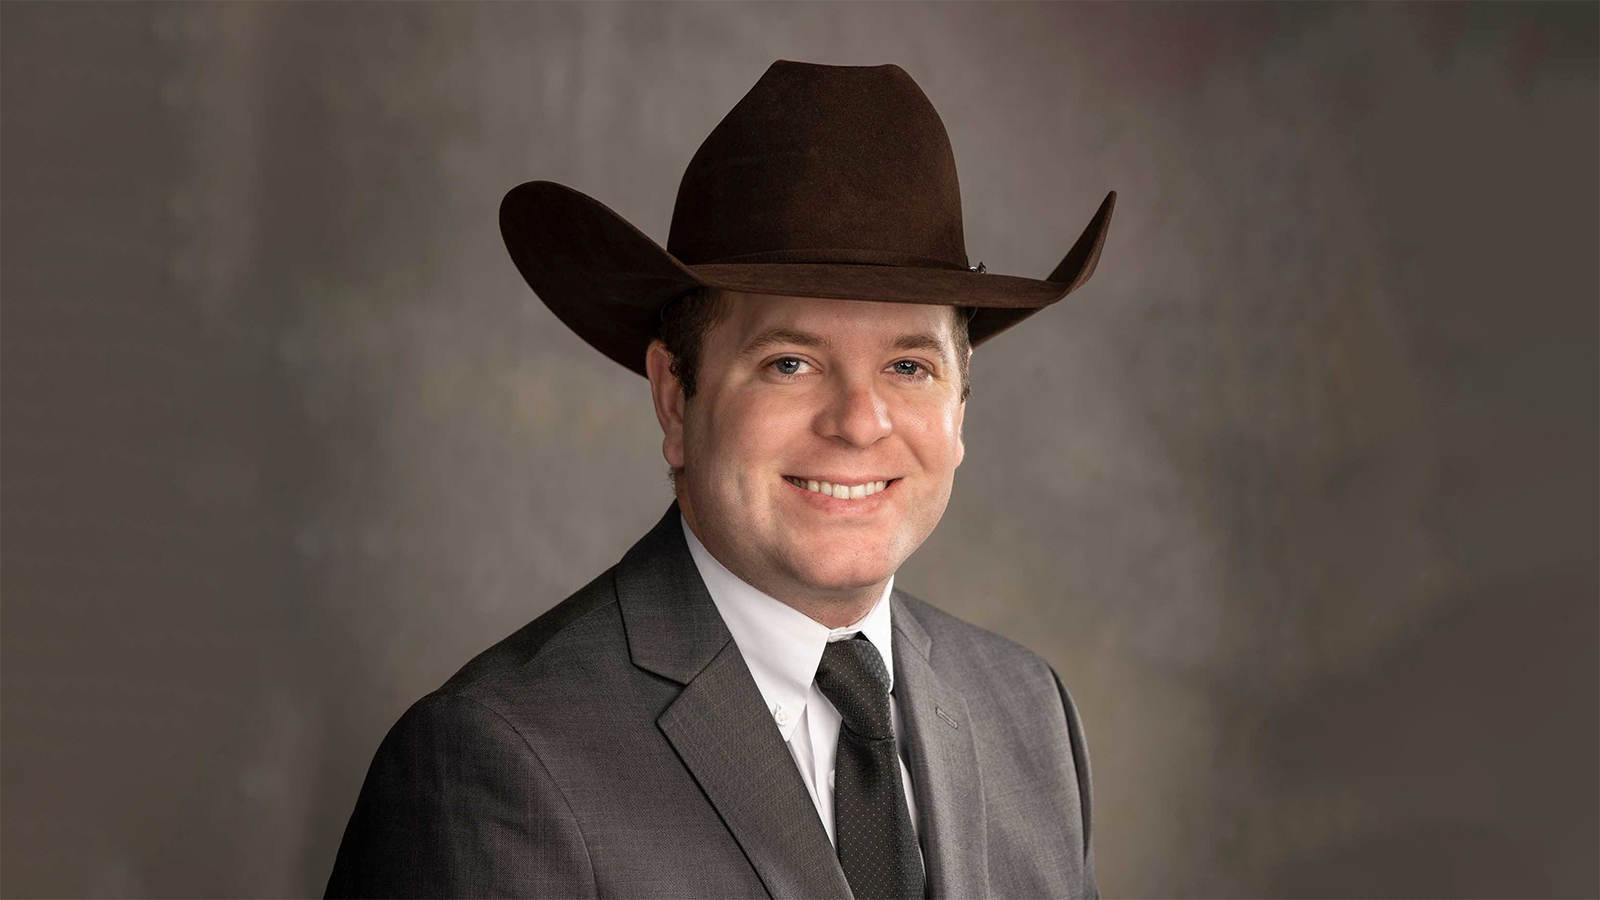 Wyatt Clark was named as the next Rodeo Coach at the University of Nebraska-Lincoln